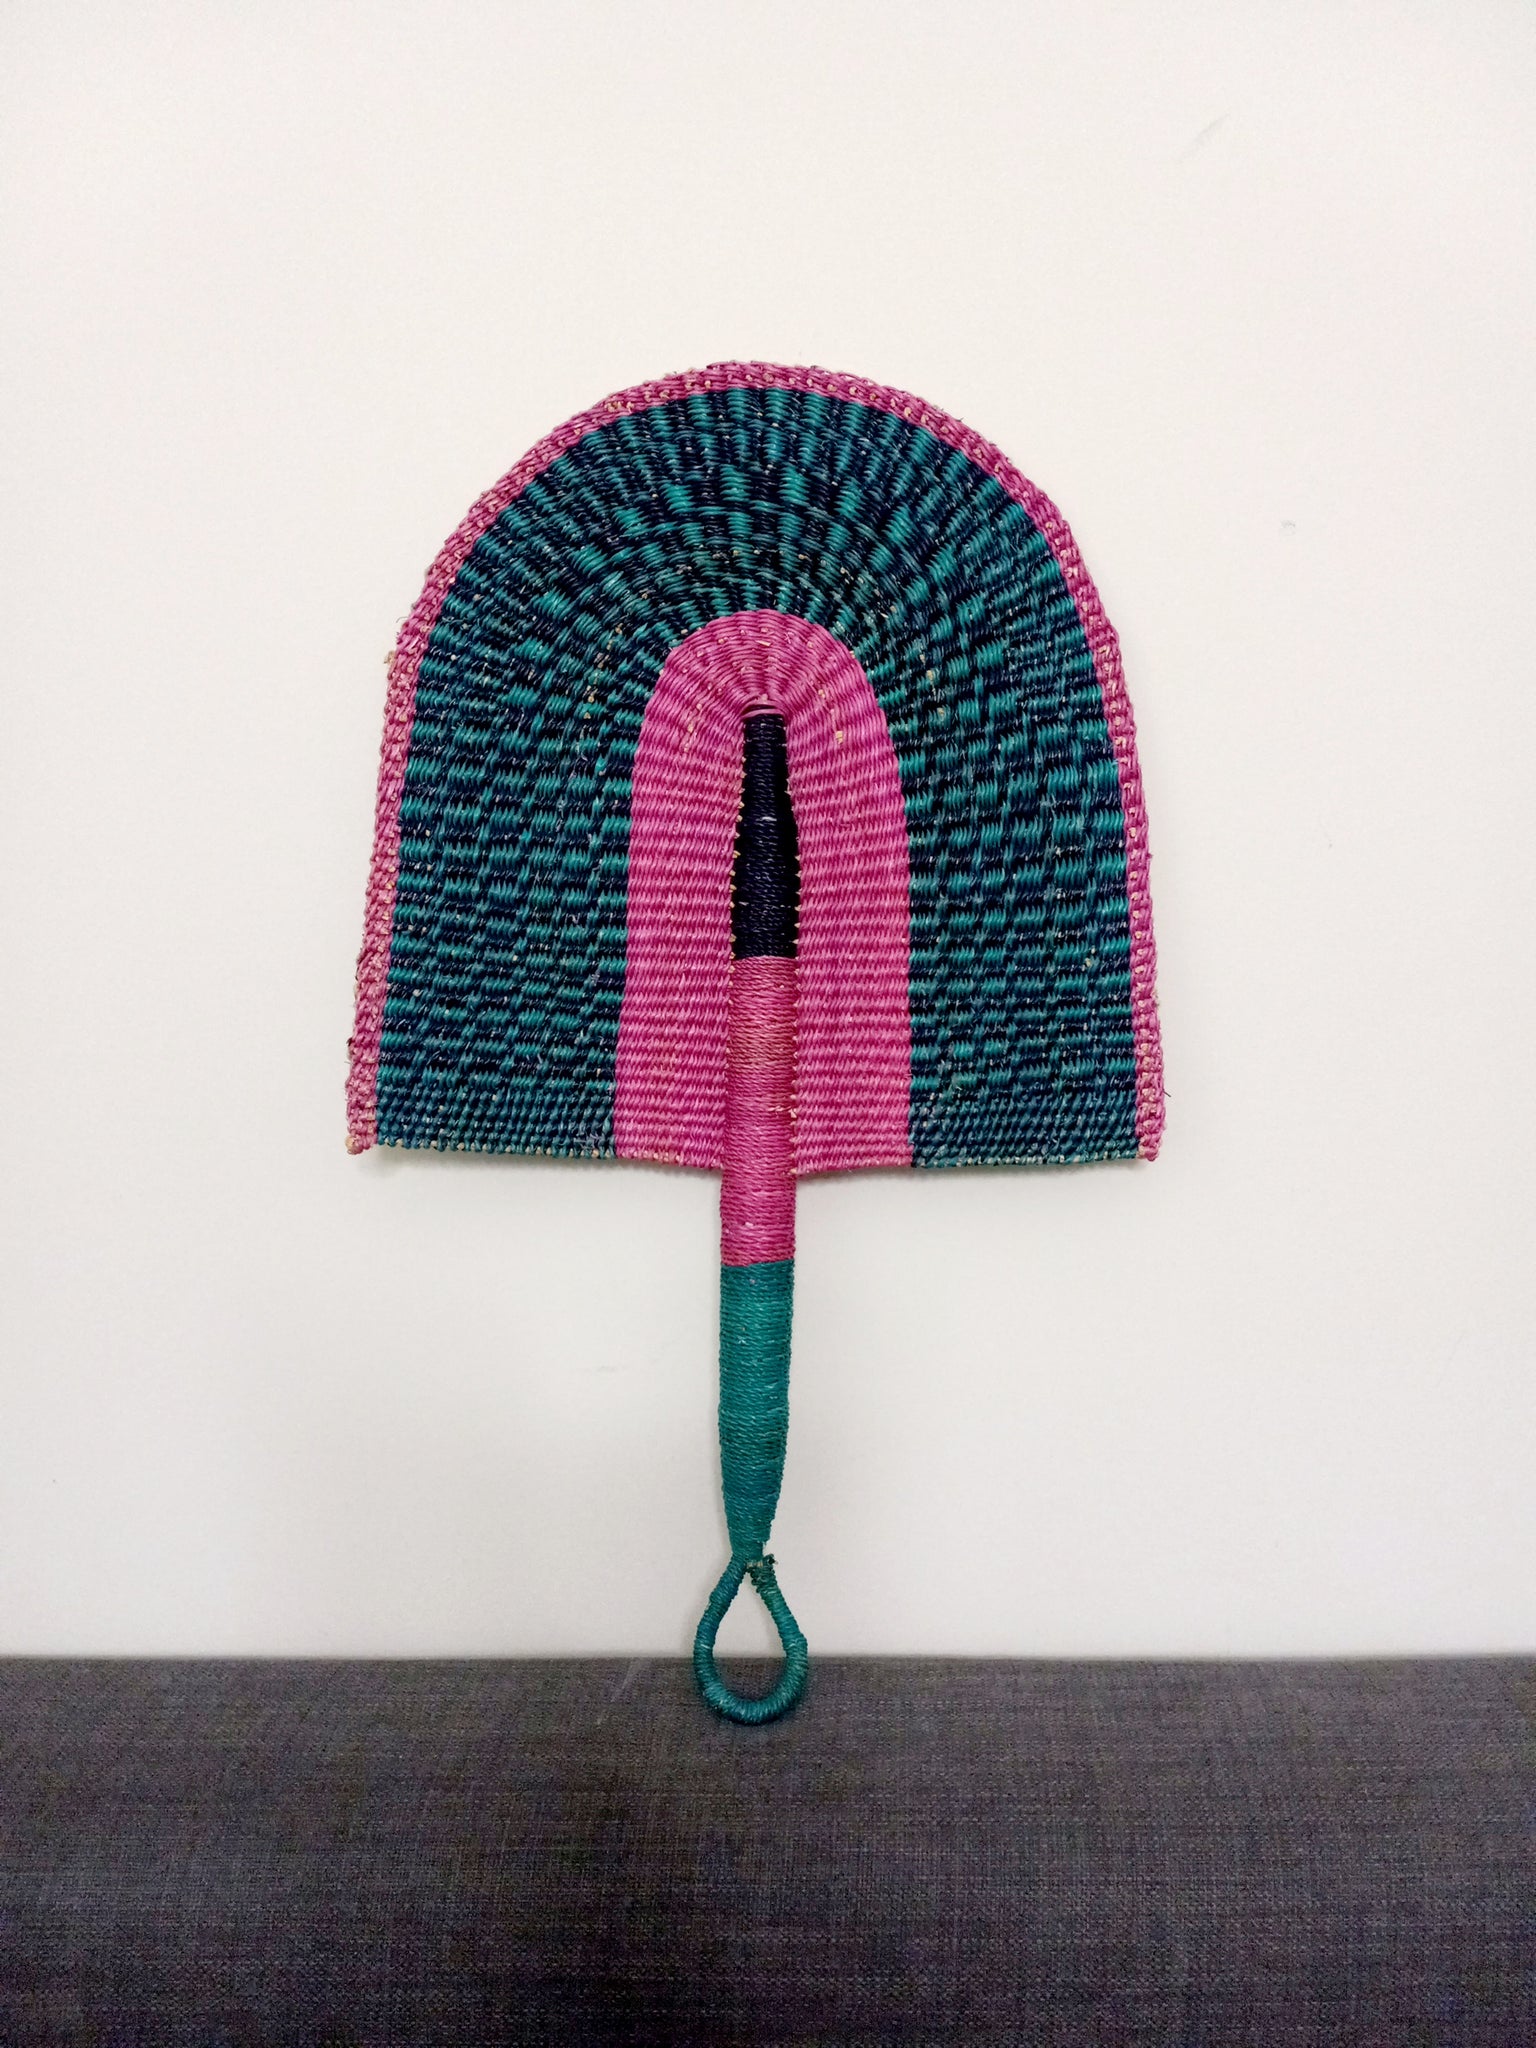 Green and Pink Hand-Woven Fan